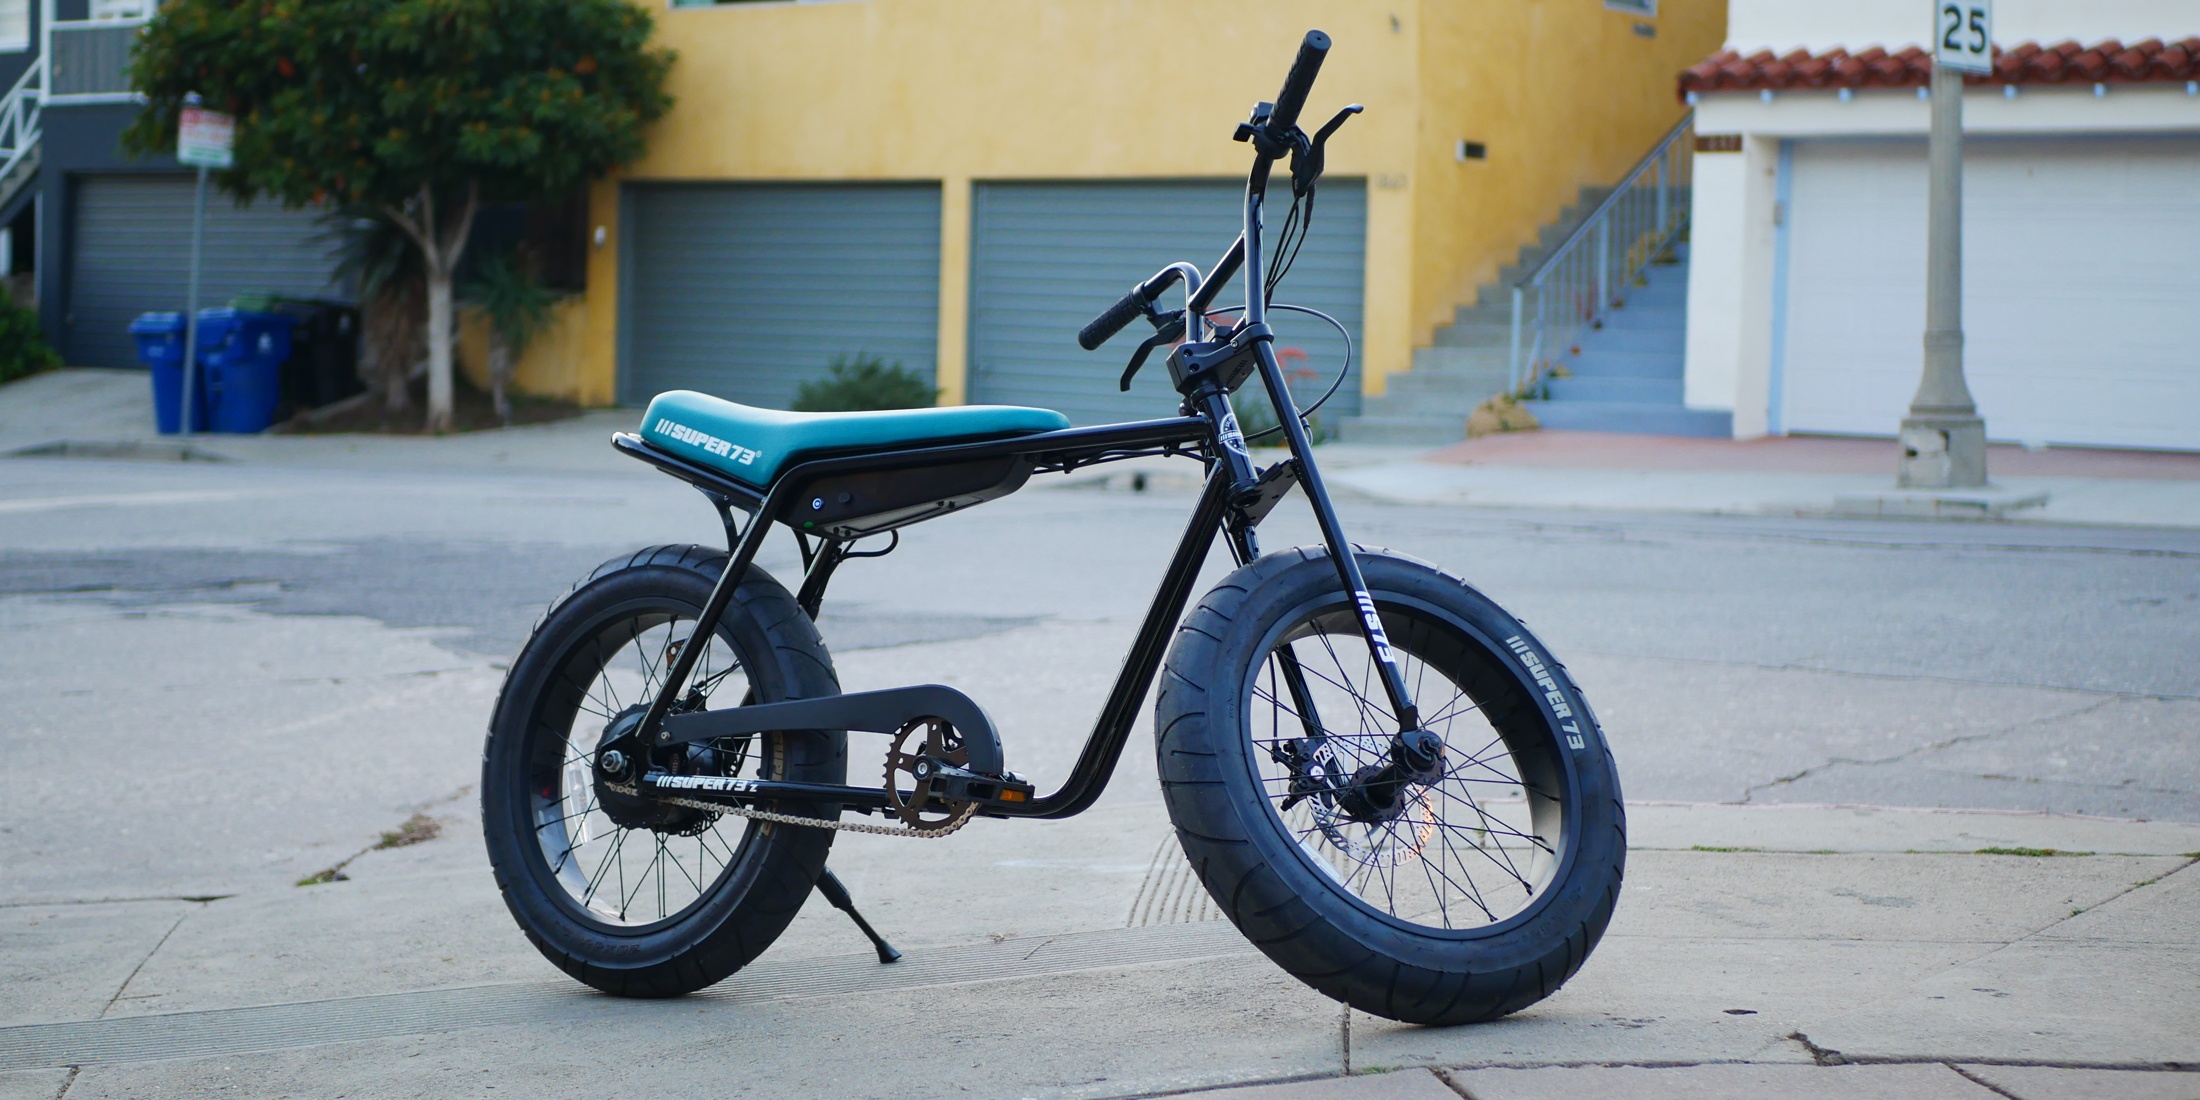 Super73-Z1 review How good can the cheapest Super73 electric bike be?